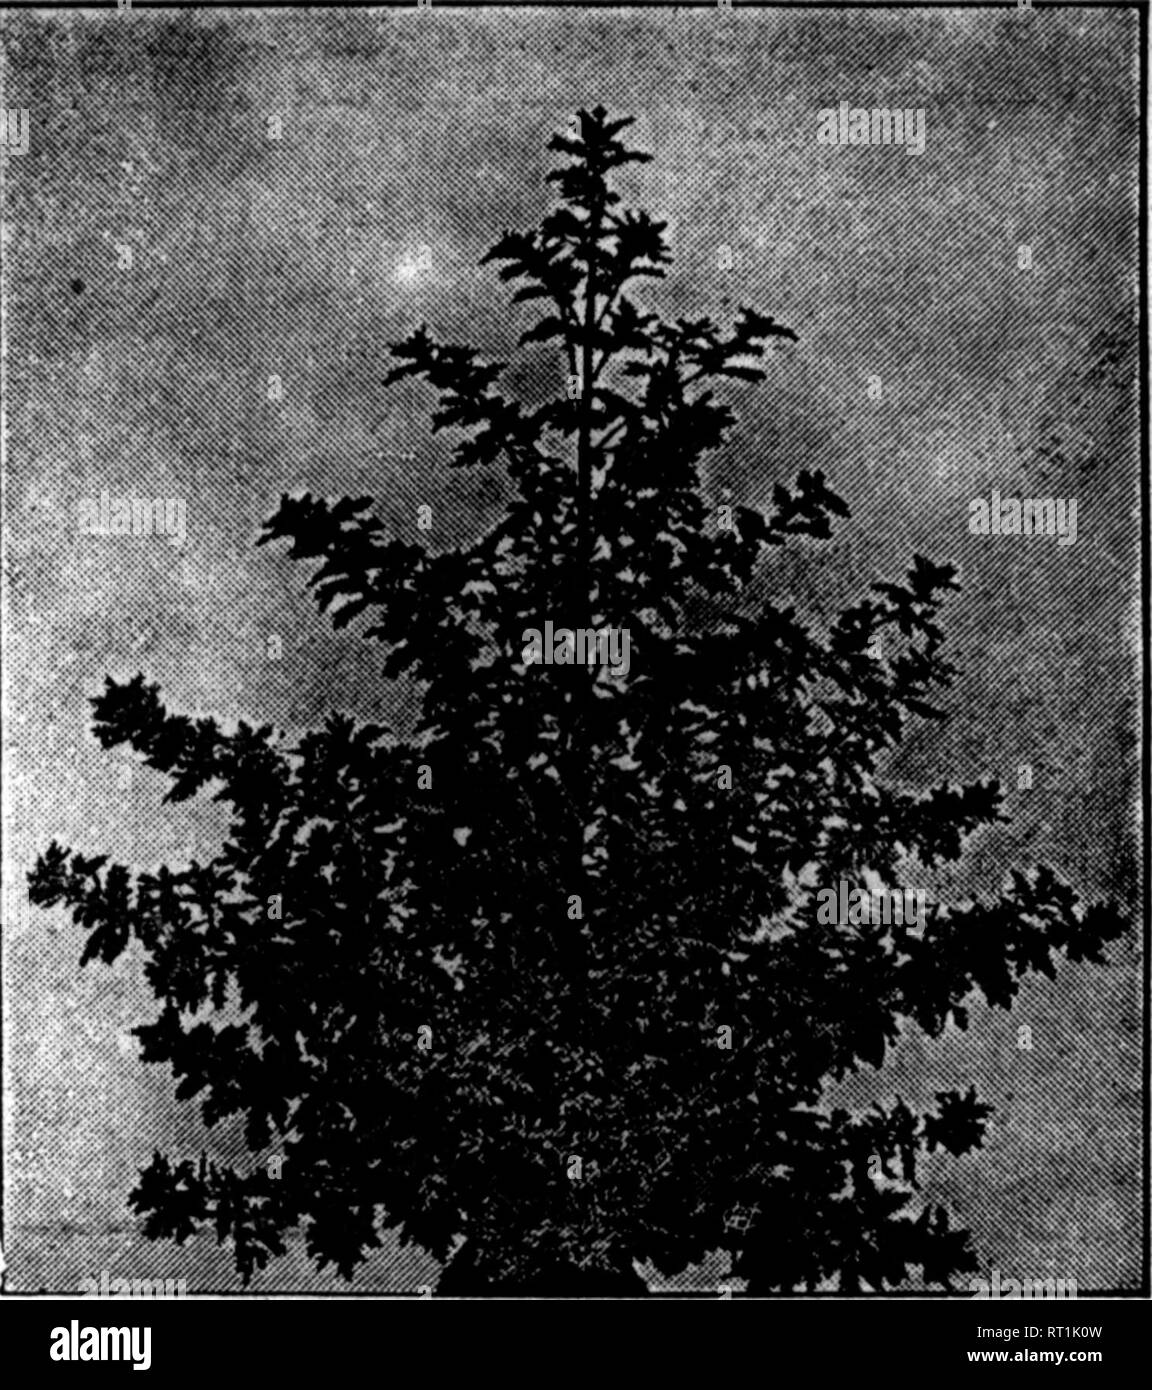 . Florists' review [microform]. Floriculture. &quot;&quot;. November 9, 1911. The Weekly Florists'Review* 57 TEICHER'S lilEW lORCING STOCKS See Fare 1». October 5 Issue of The Review Teloher's Snowflake, snow-white, wall- flower-leaved. Roae Telcher, delicate light rose. Kate Telcher, porcelain-blue. Ruby, fiery red. Mrs. Mary Telcher, soft, delicate, salmon- colored . Sapphire, deep sapphirine blue. Telcher'8 Glant-floweriiiB Mammoth. Column Ten-^eek Stocks, pure white. Kmpresa AuBuata Victoria, silvery, del- icate ligbC lilac. PM.,50c; 10 pkls.,$4.50; 100 pkU.,$35 00 PAUL TEICHER %^^i^^^ Ori Stock Photo